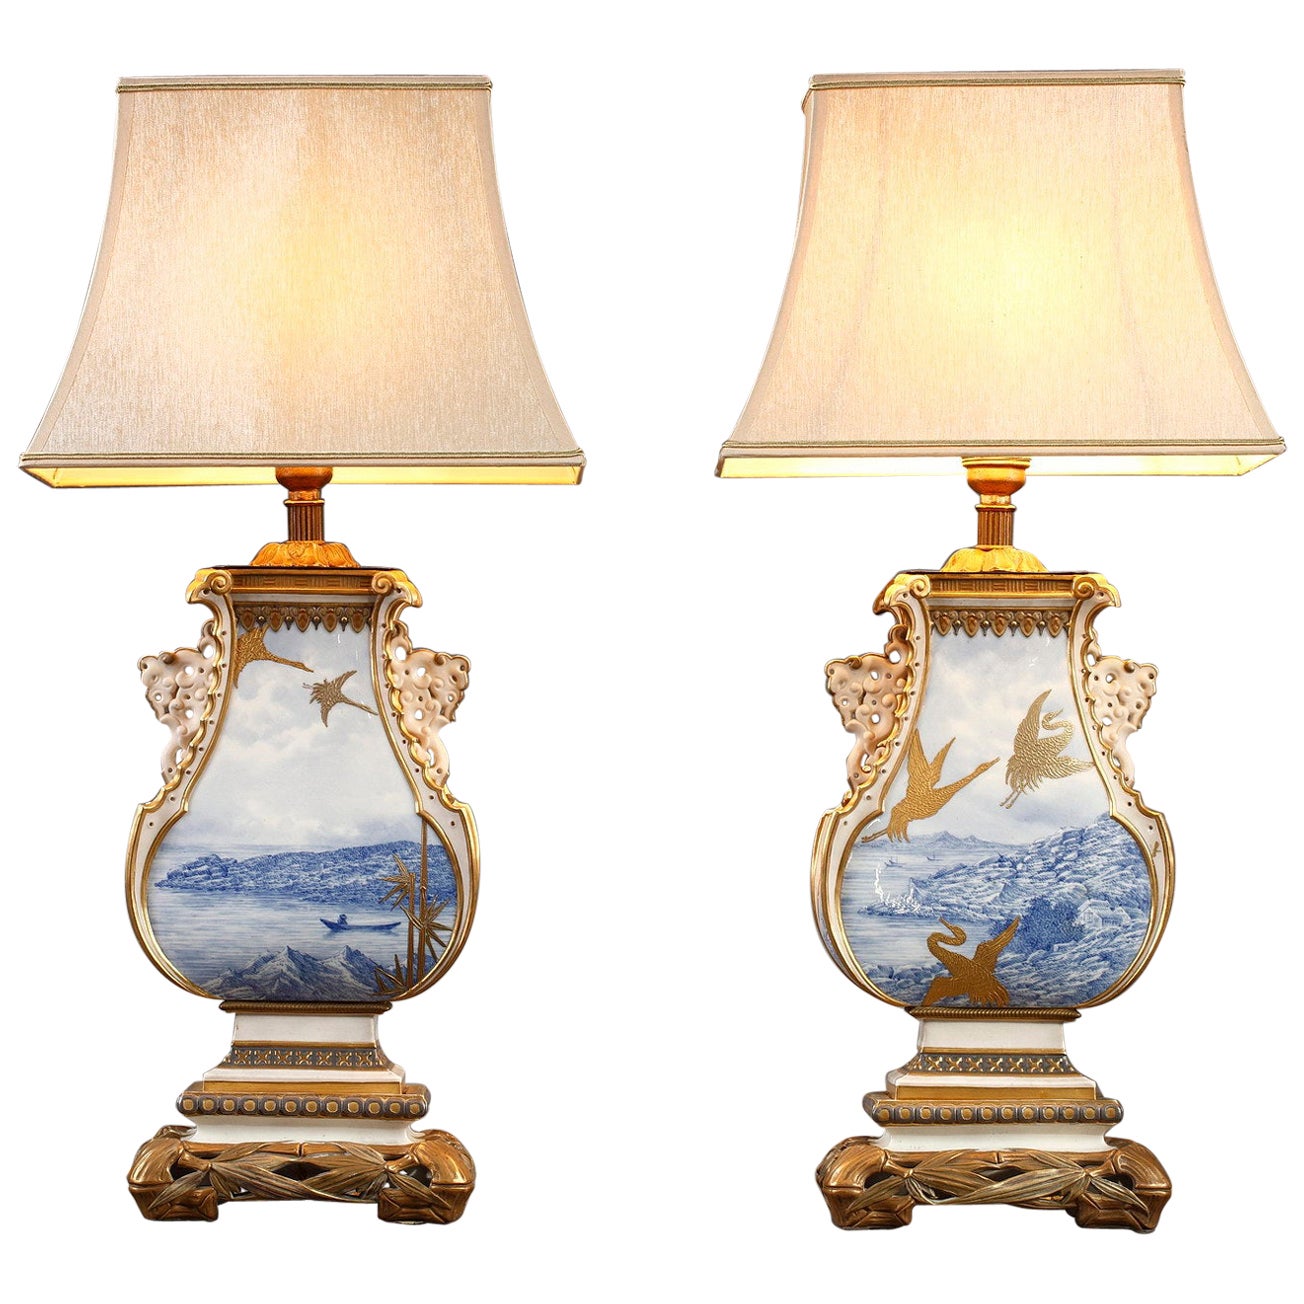 Pair of Royal Worcester Porcelain Lamp-Mounted Vases, England, 1877